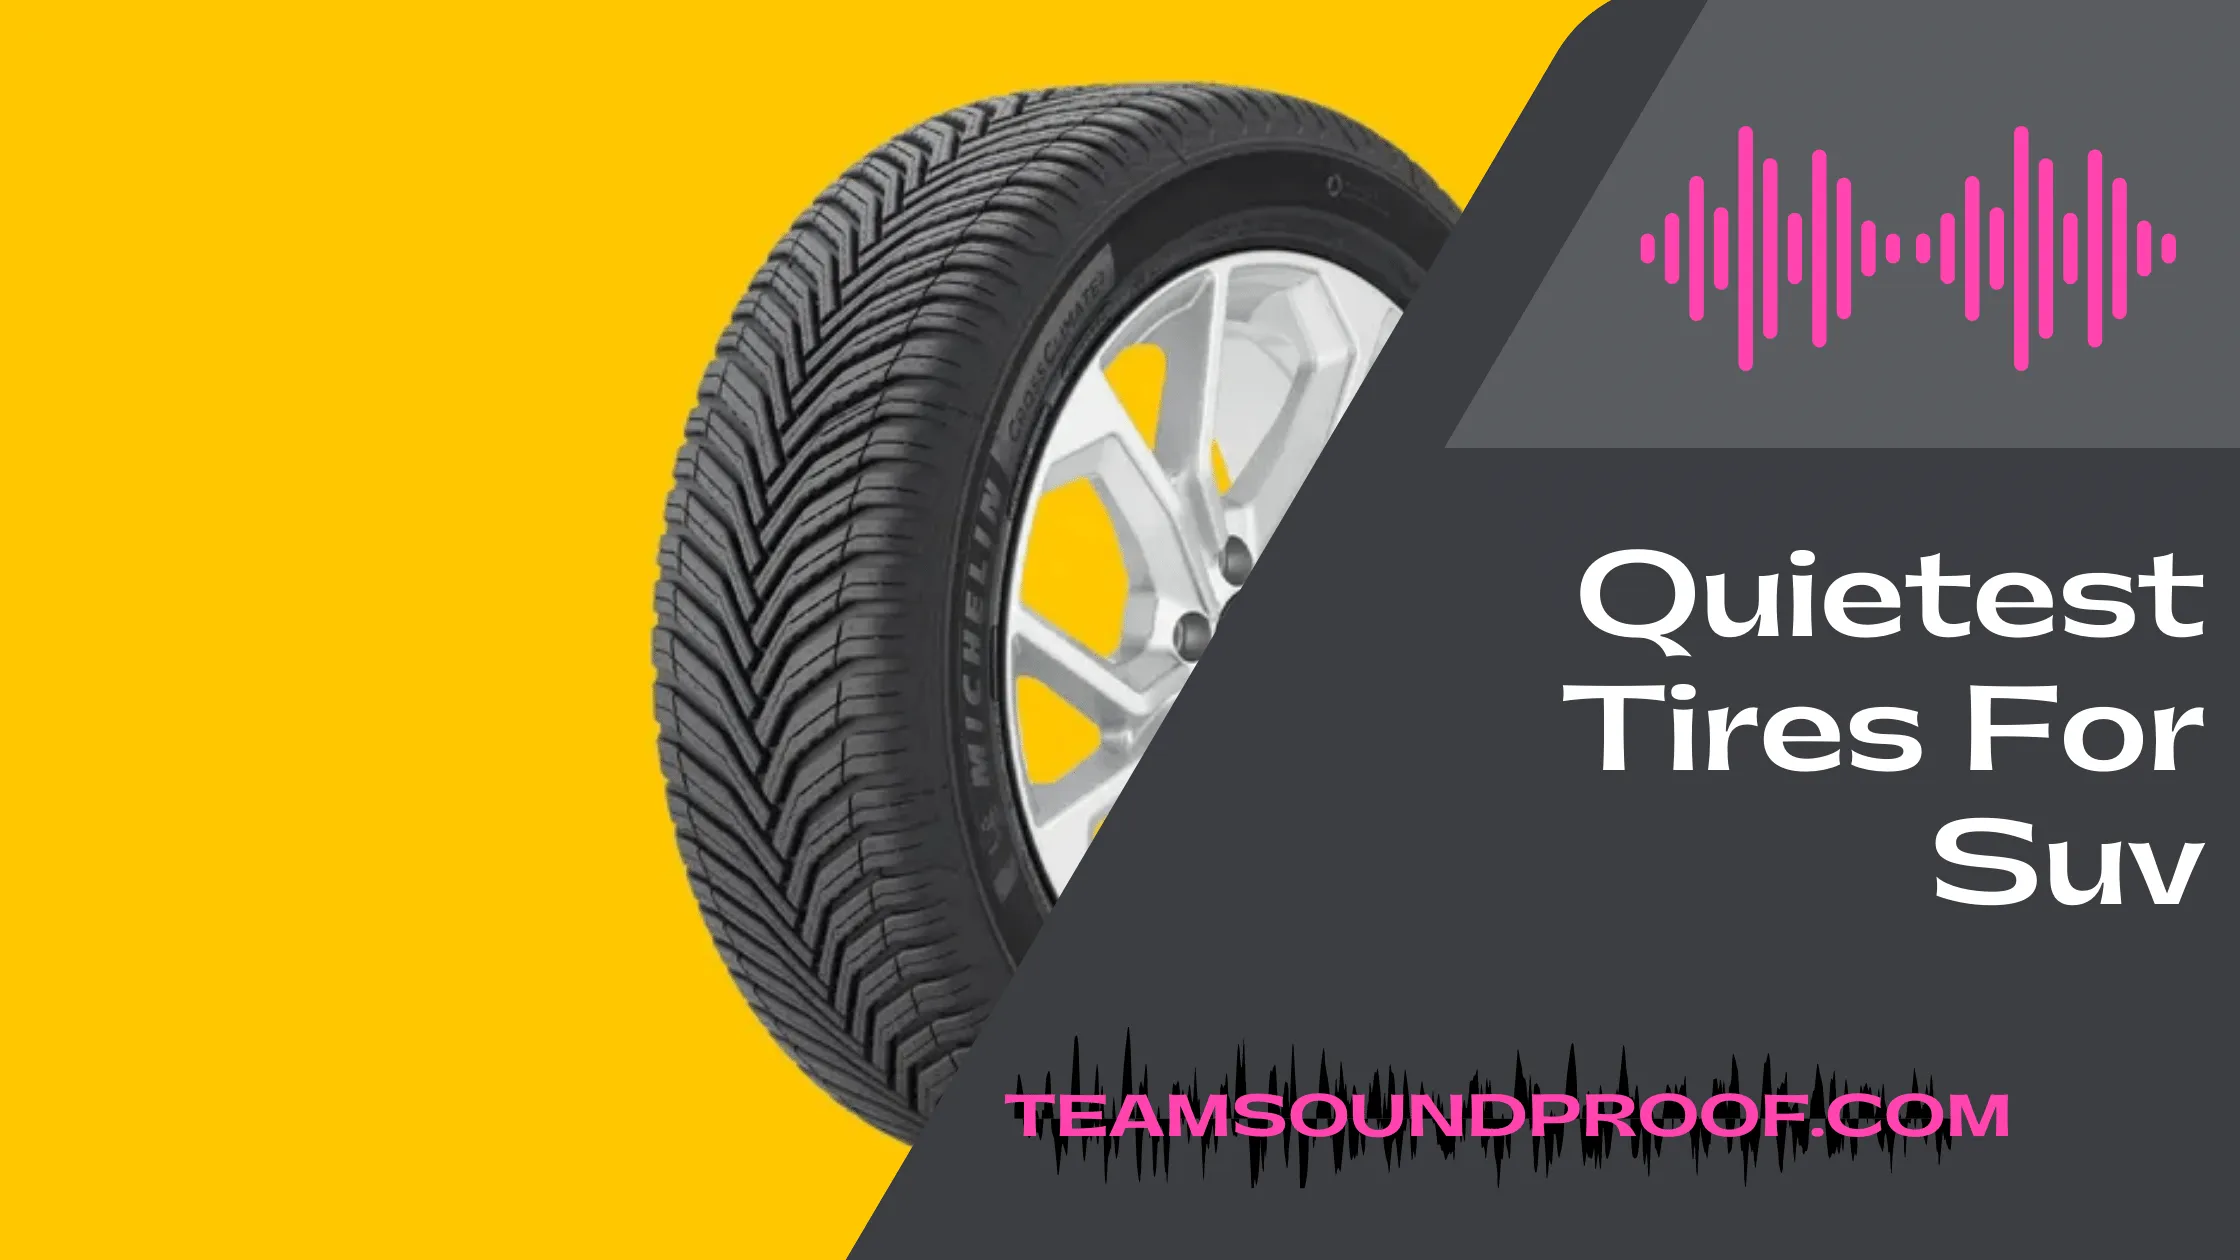 Quietest Tires For Suv - Comprehensive Guide